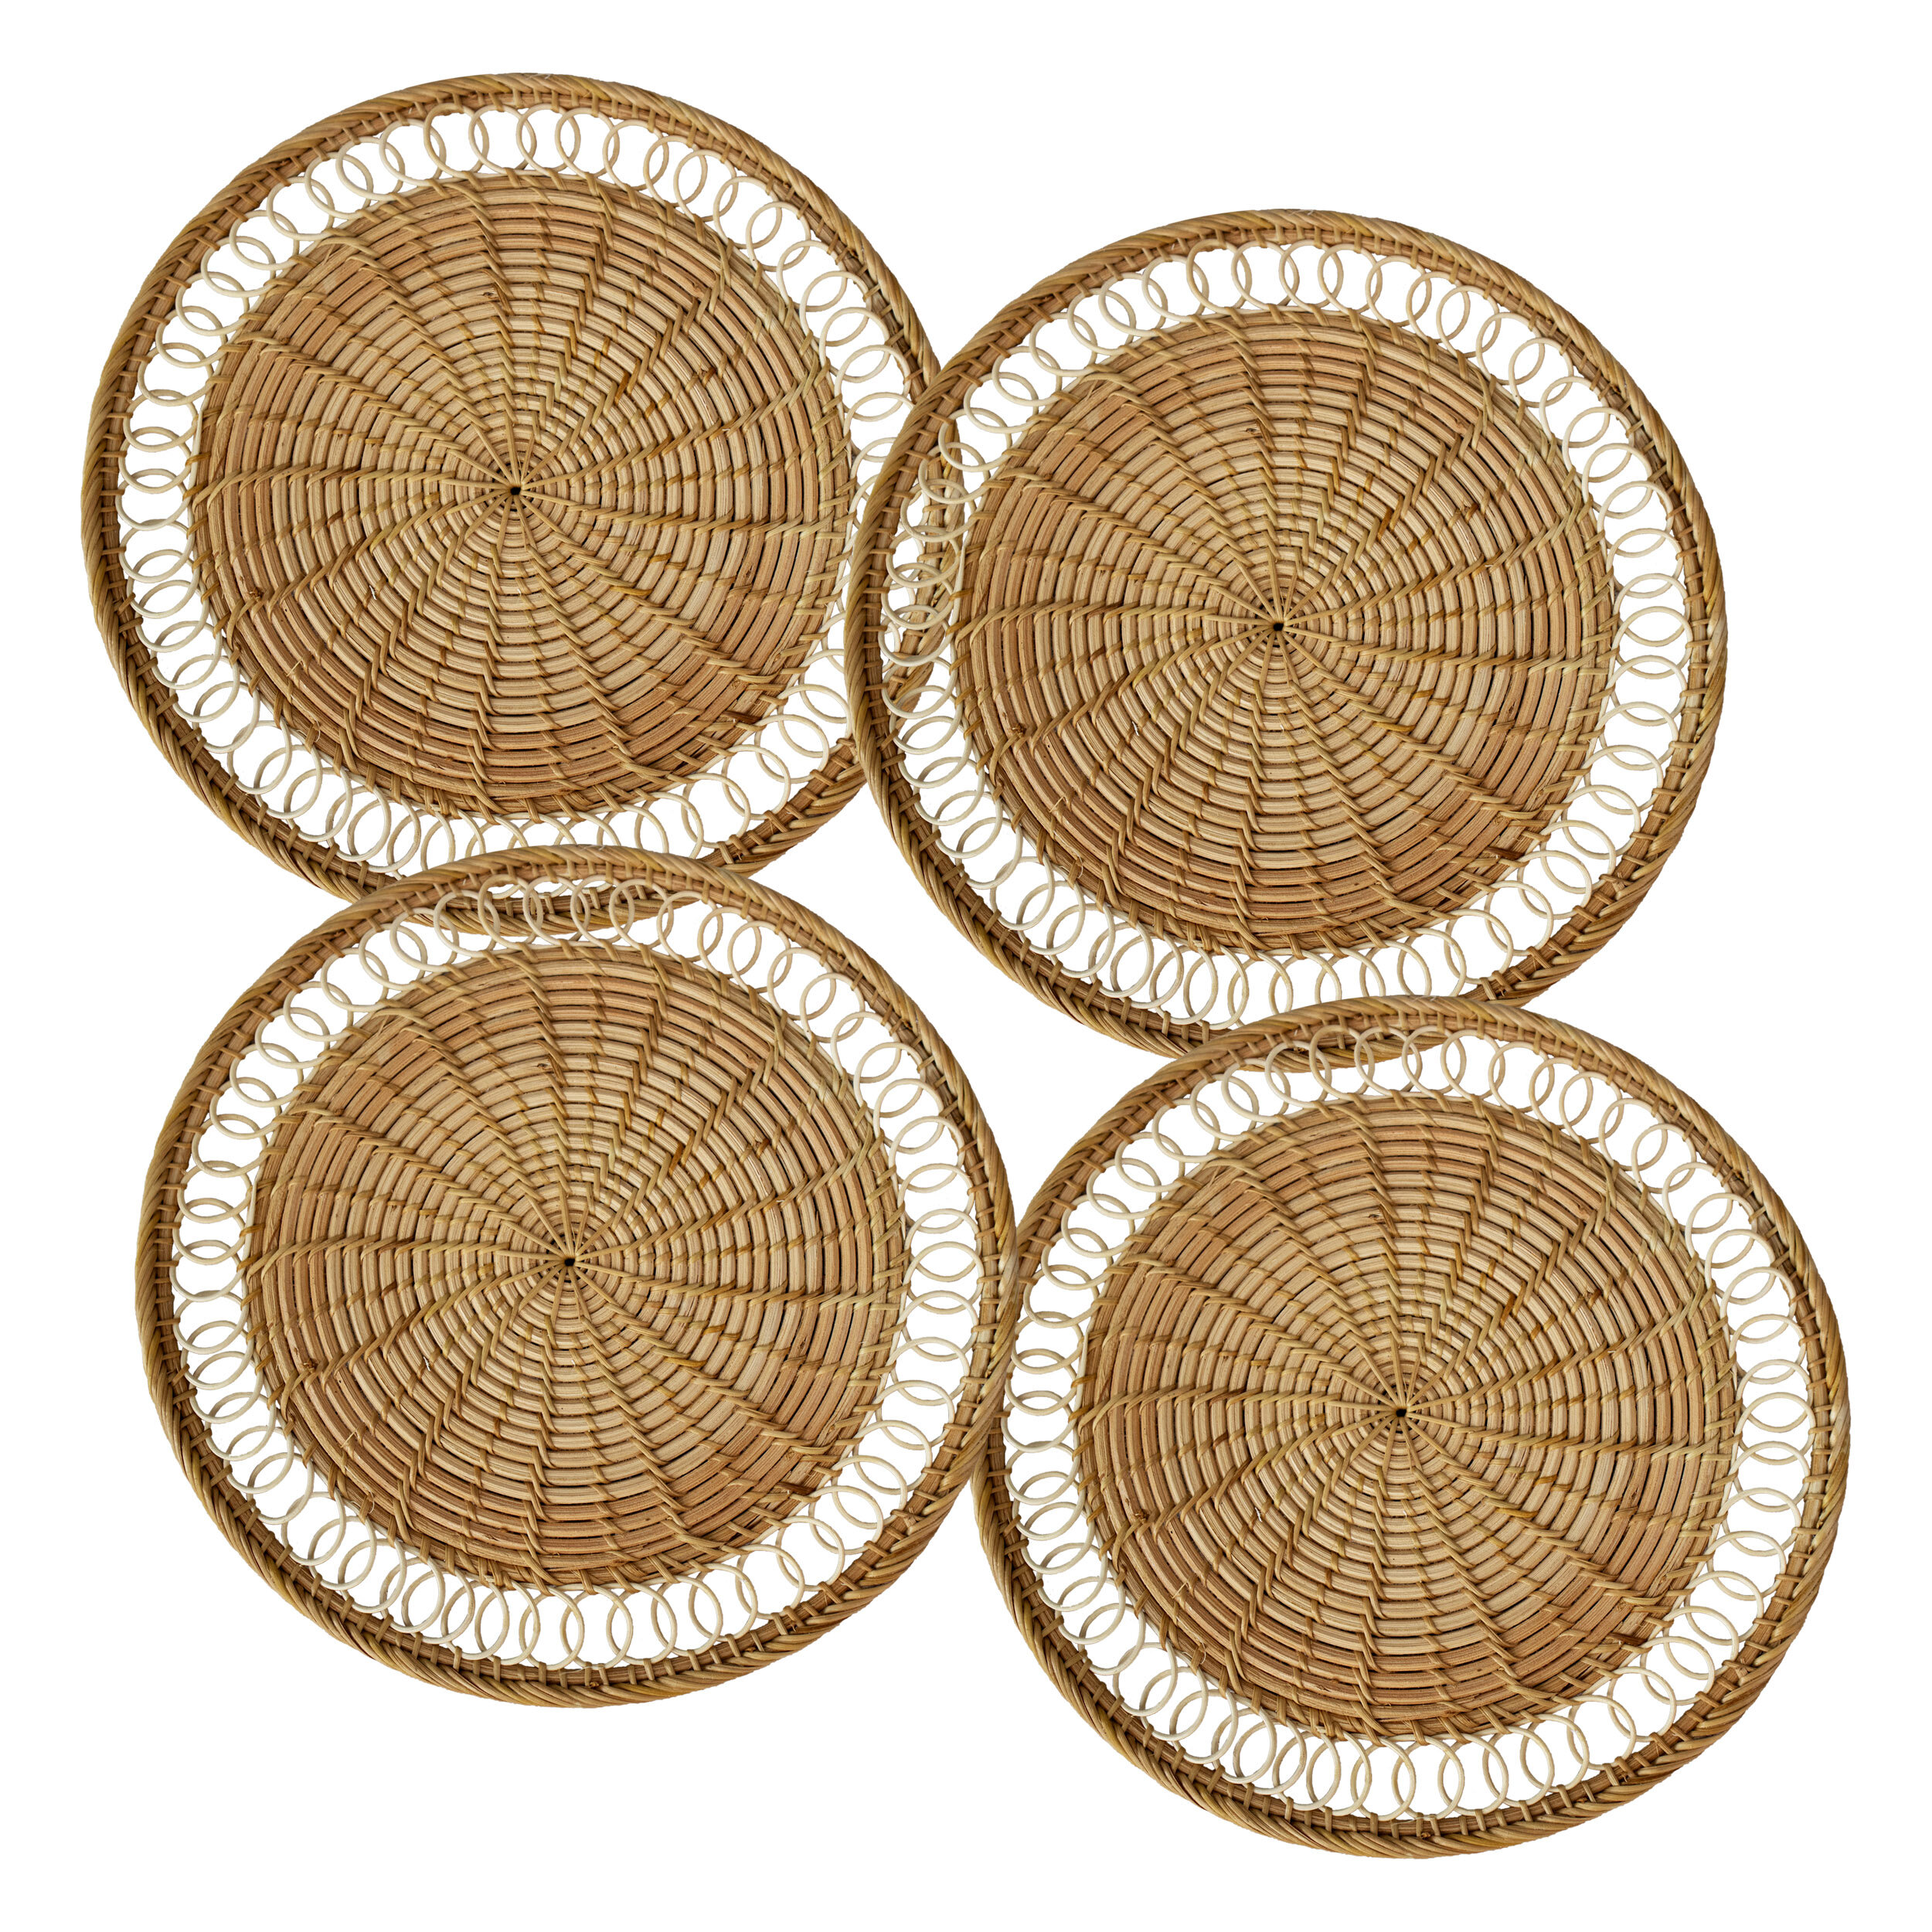 Table Placemats set of 4 Rattan Decor 15” Round Brown And Green Available